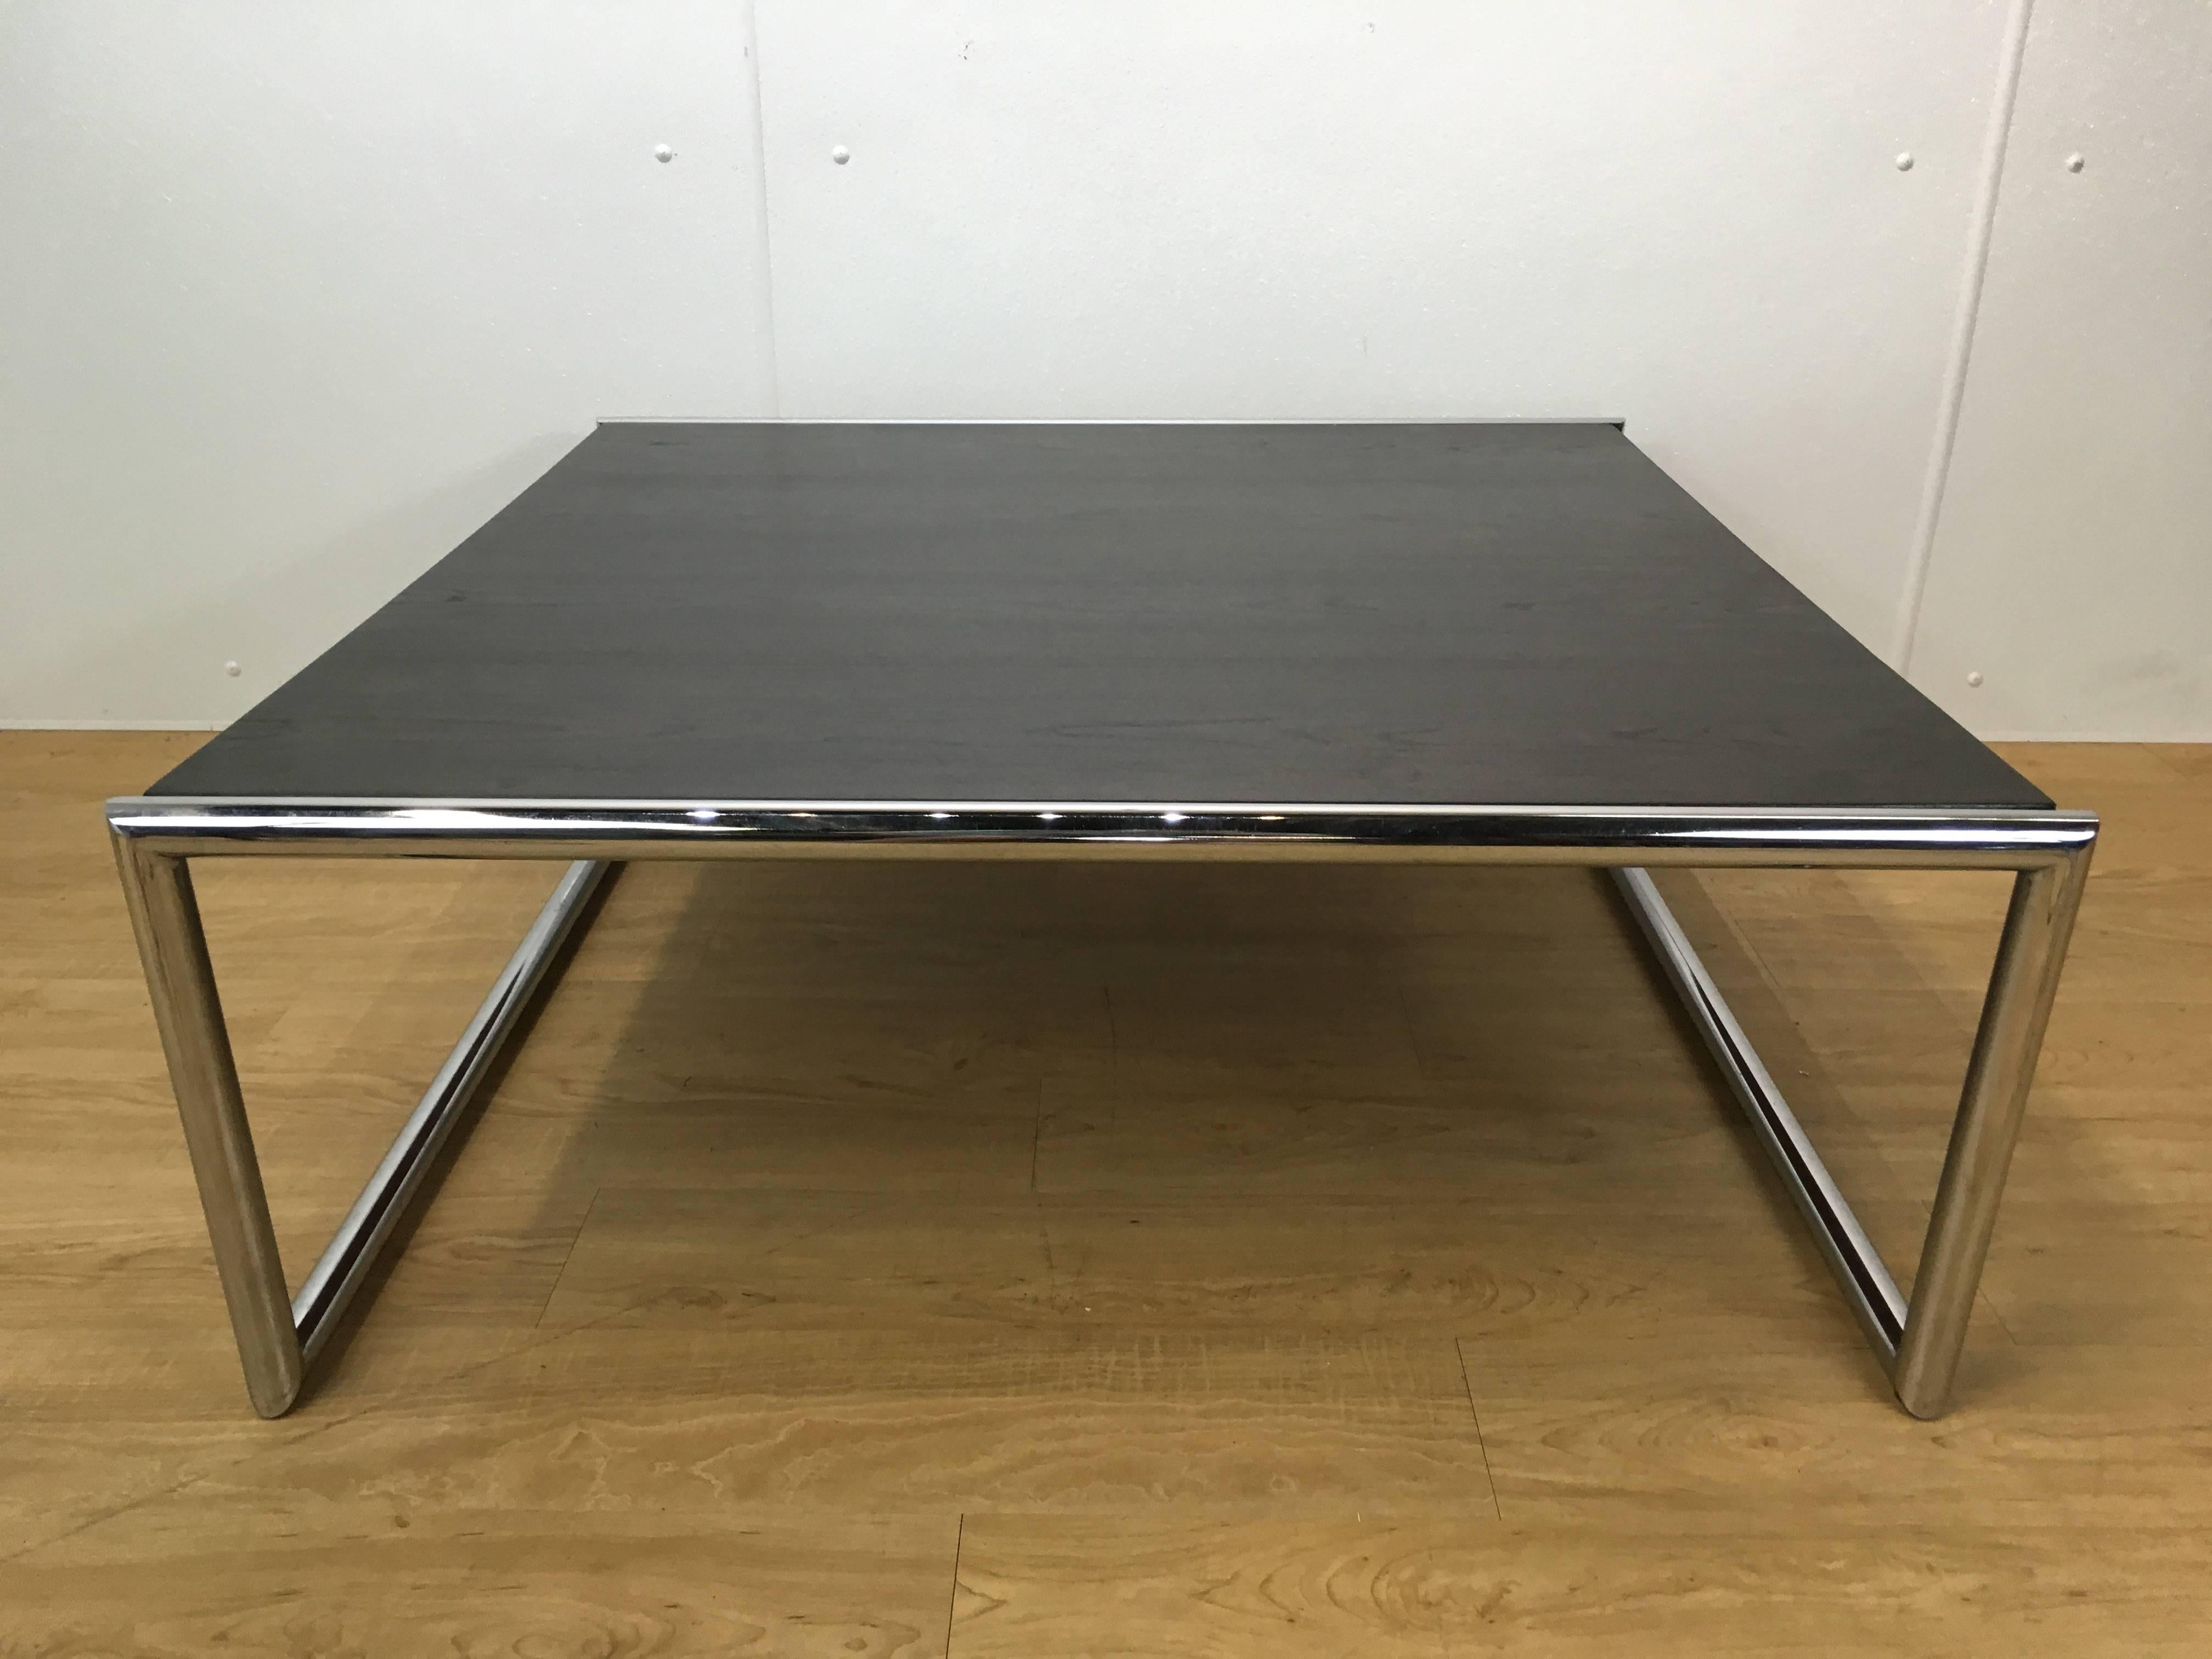 A large ebonized mahogany and tubular chrome cocktail table. Great finish to the wood top showing the beautiful grain. Great scale and proportions.